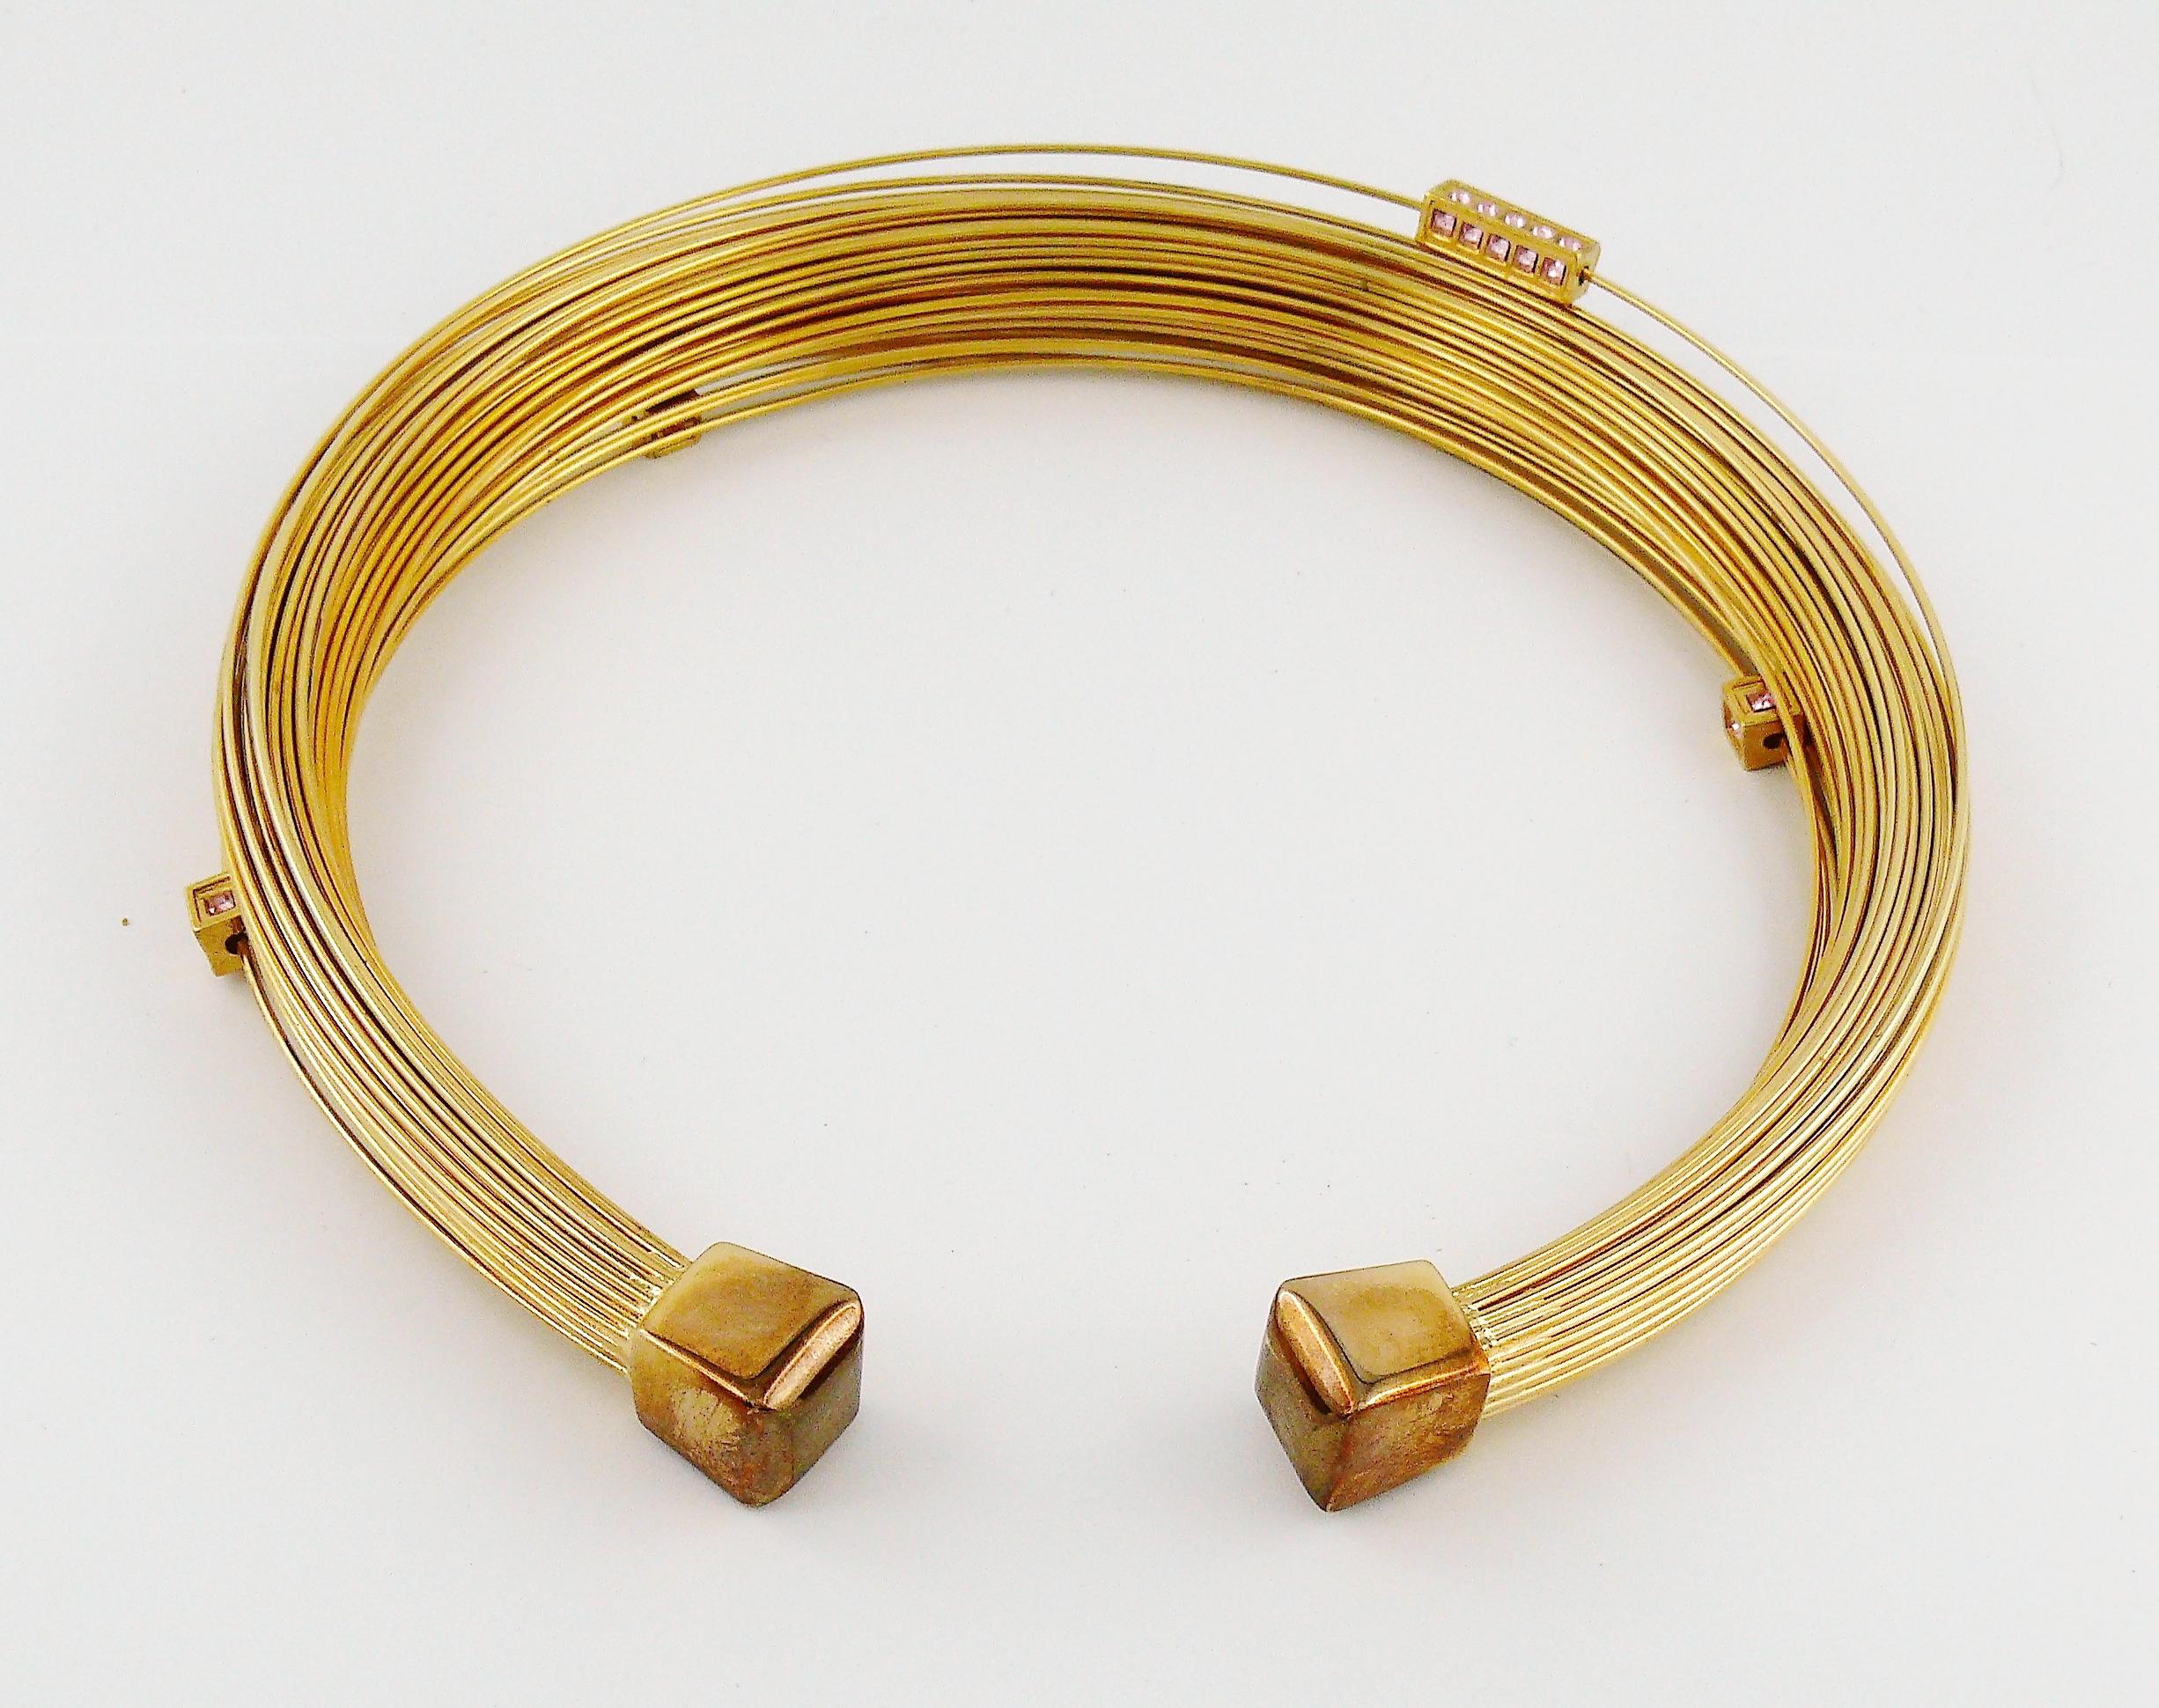 Thierry Mugler Vintage Gold Toned Bundled Wires Choker Necklace For Sale 3